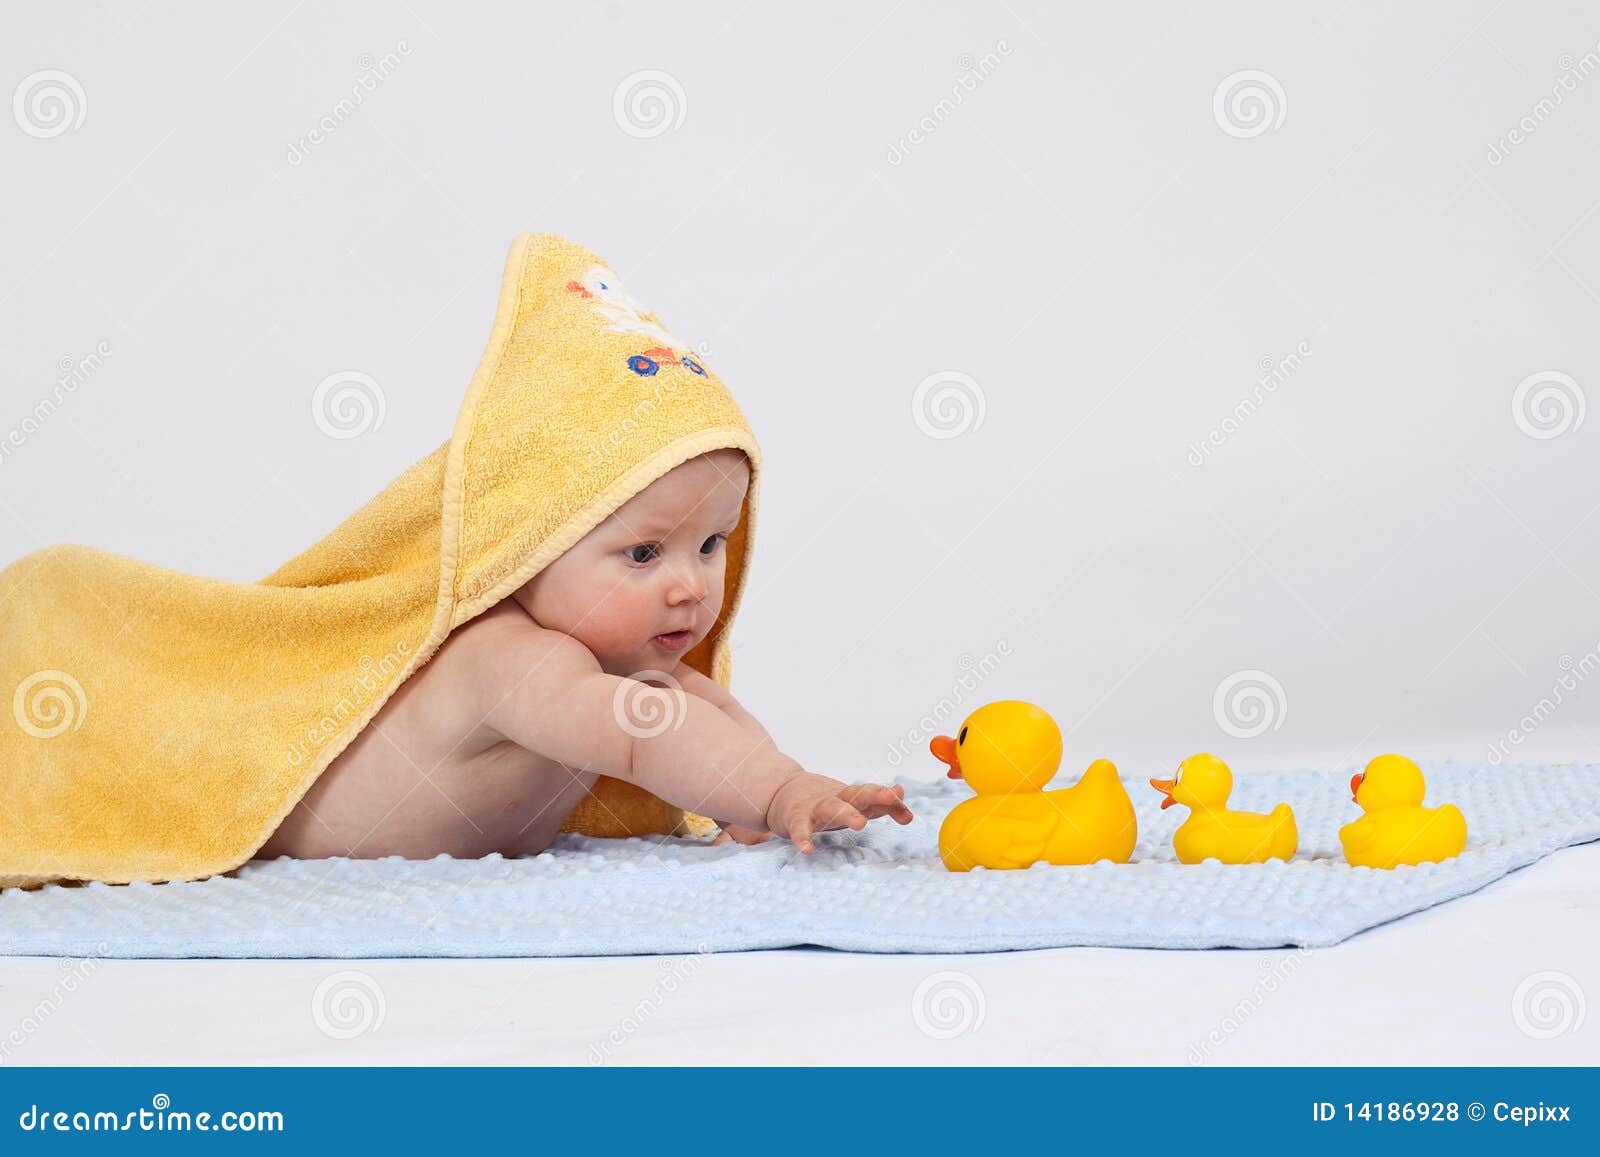 Baby in a yellow towel stock photo. Image of health, bathe - 14186928